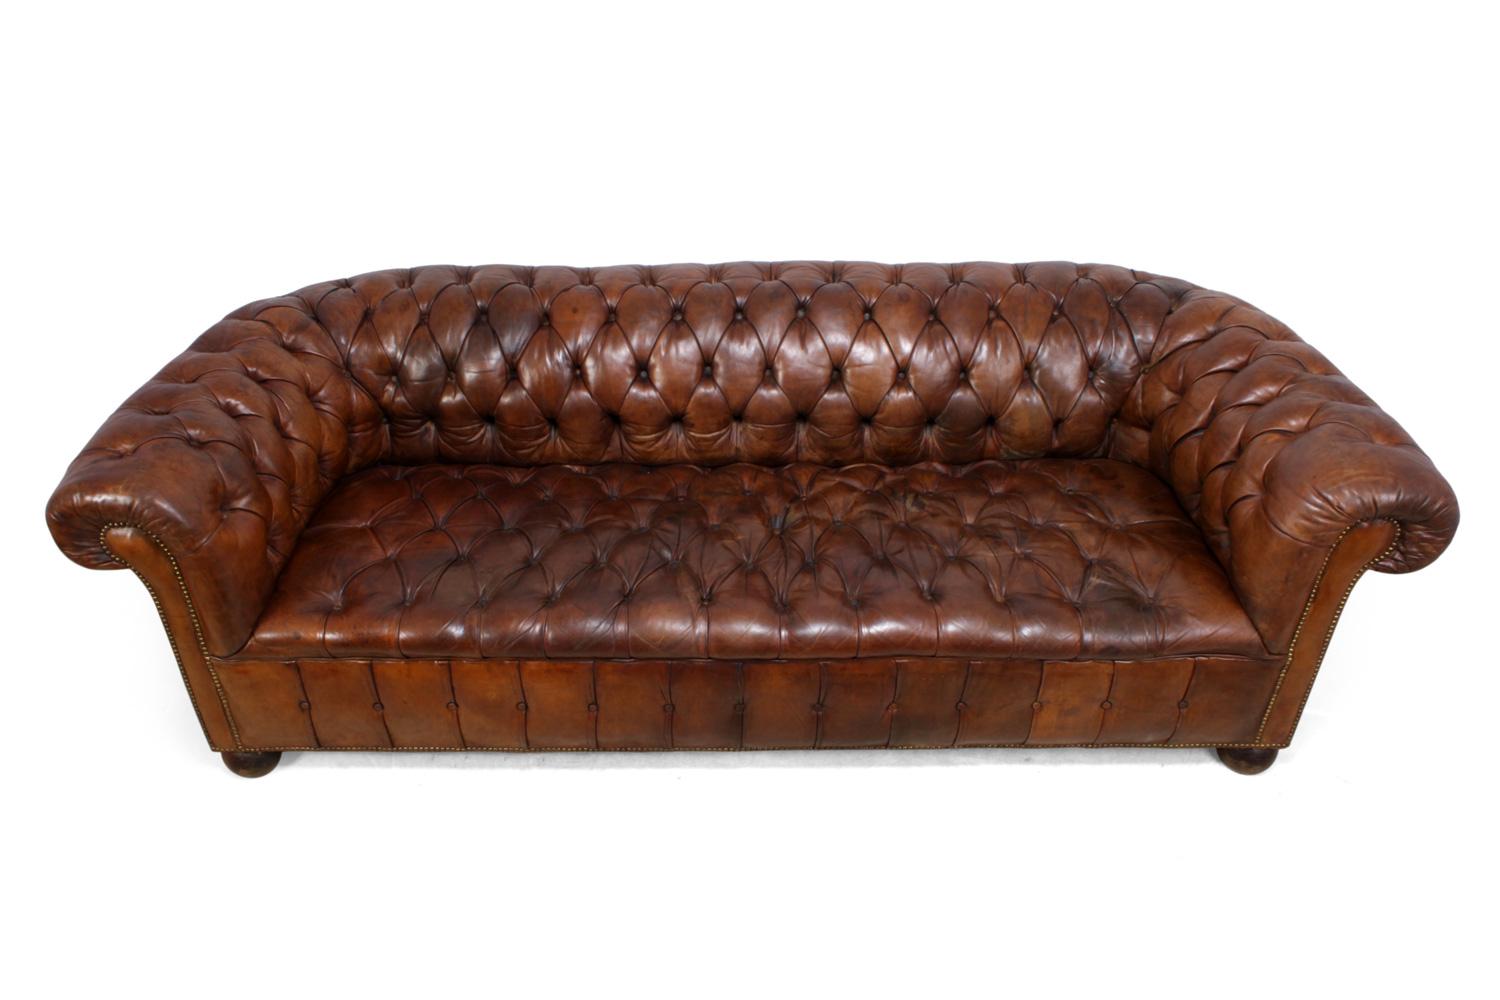 1930s English leather Chesterfield
A buttoned seated hand dyed brown leather chesterfield produced in the 1930s with solid frame, coil sprung, horse hair stuffed, bun feet

the springs have been re seated with new webbing in place all buttons are